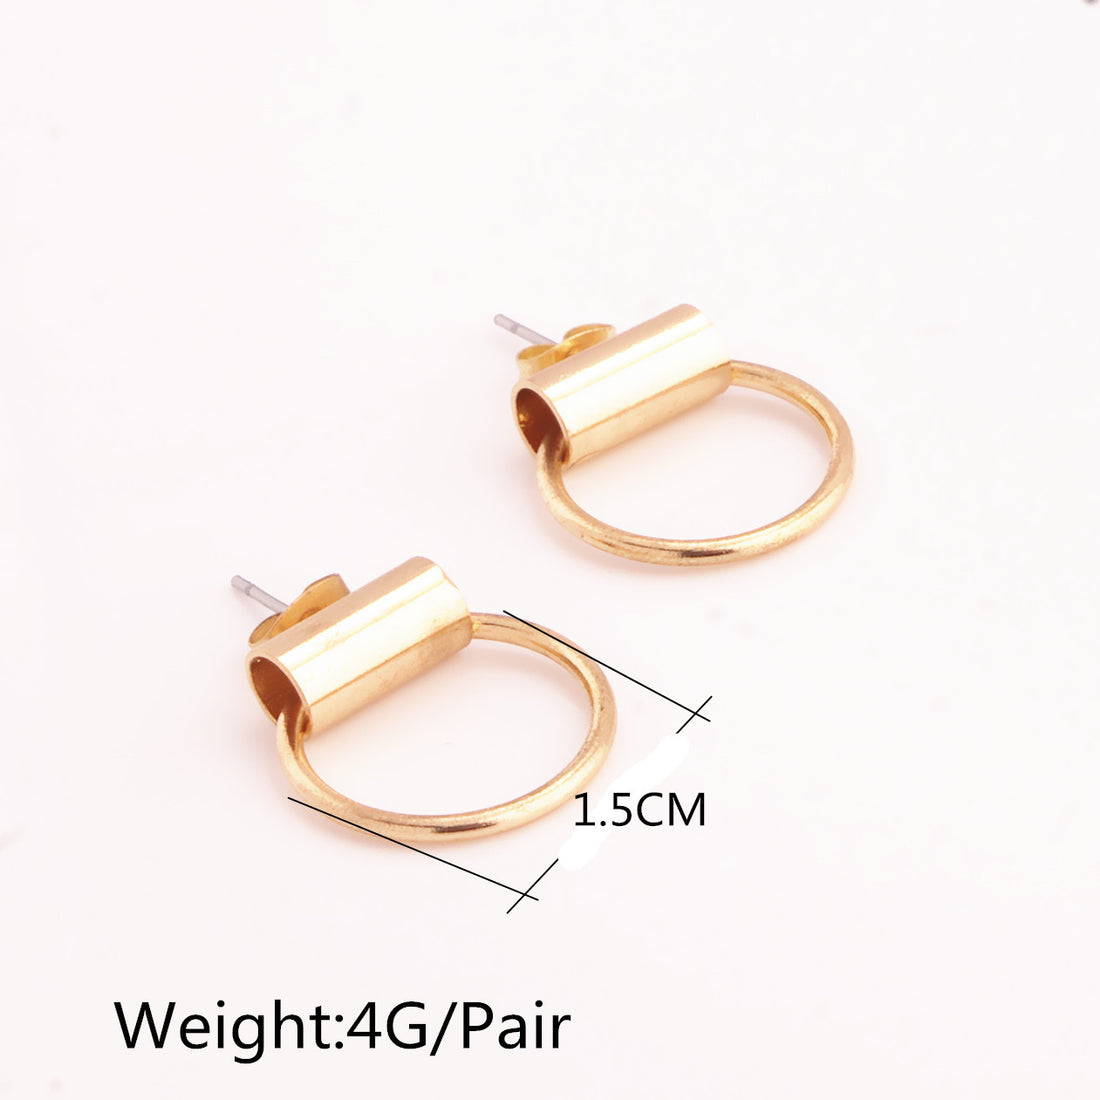 Personality Metal Ring Women's Earrings - Oh Yours Fashion - 1